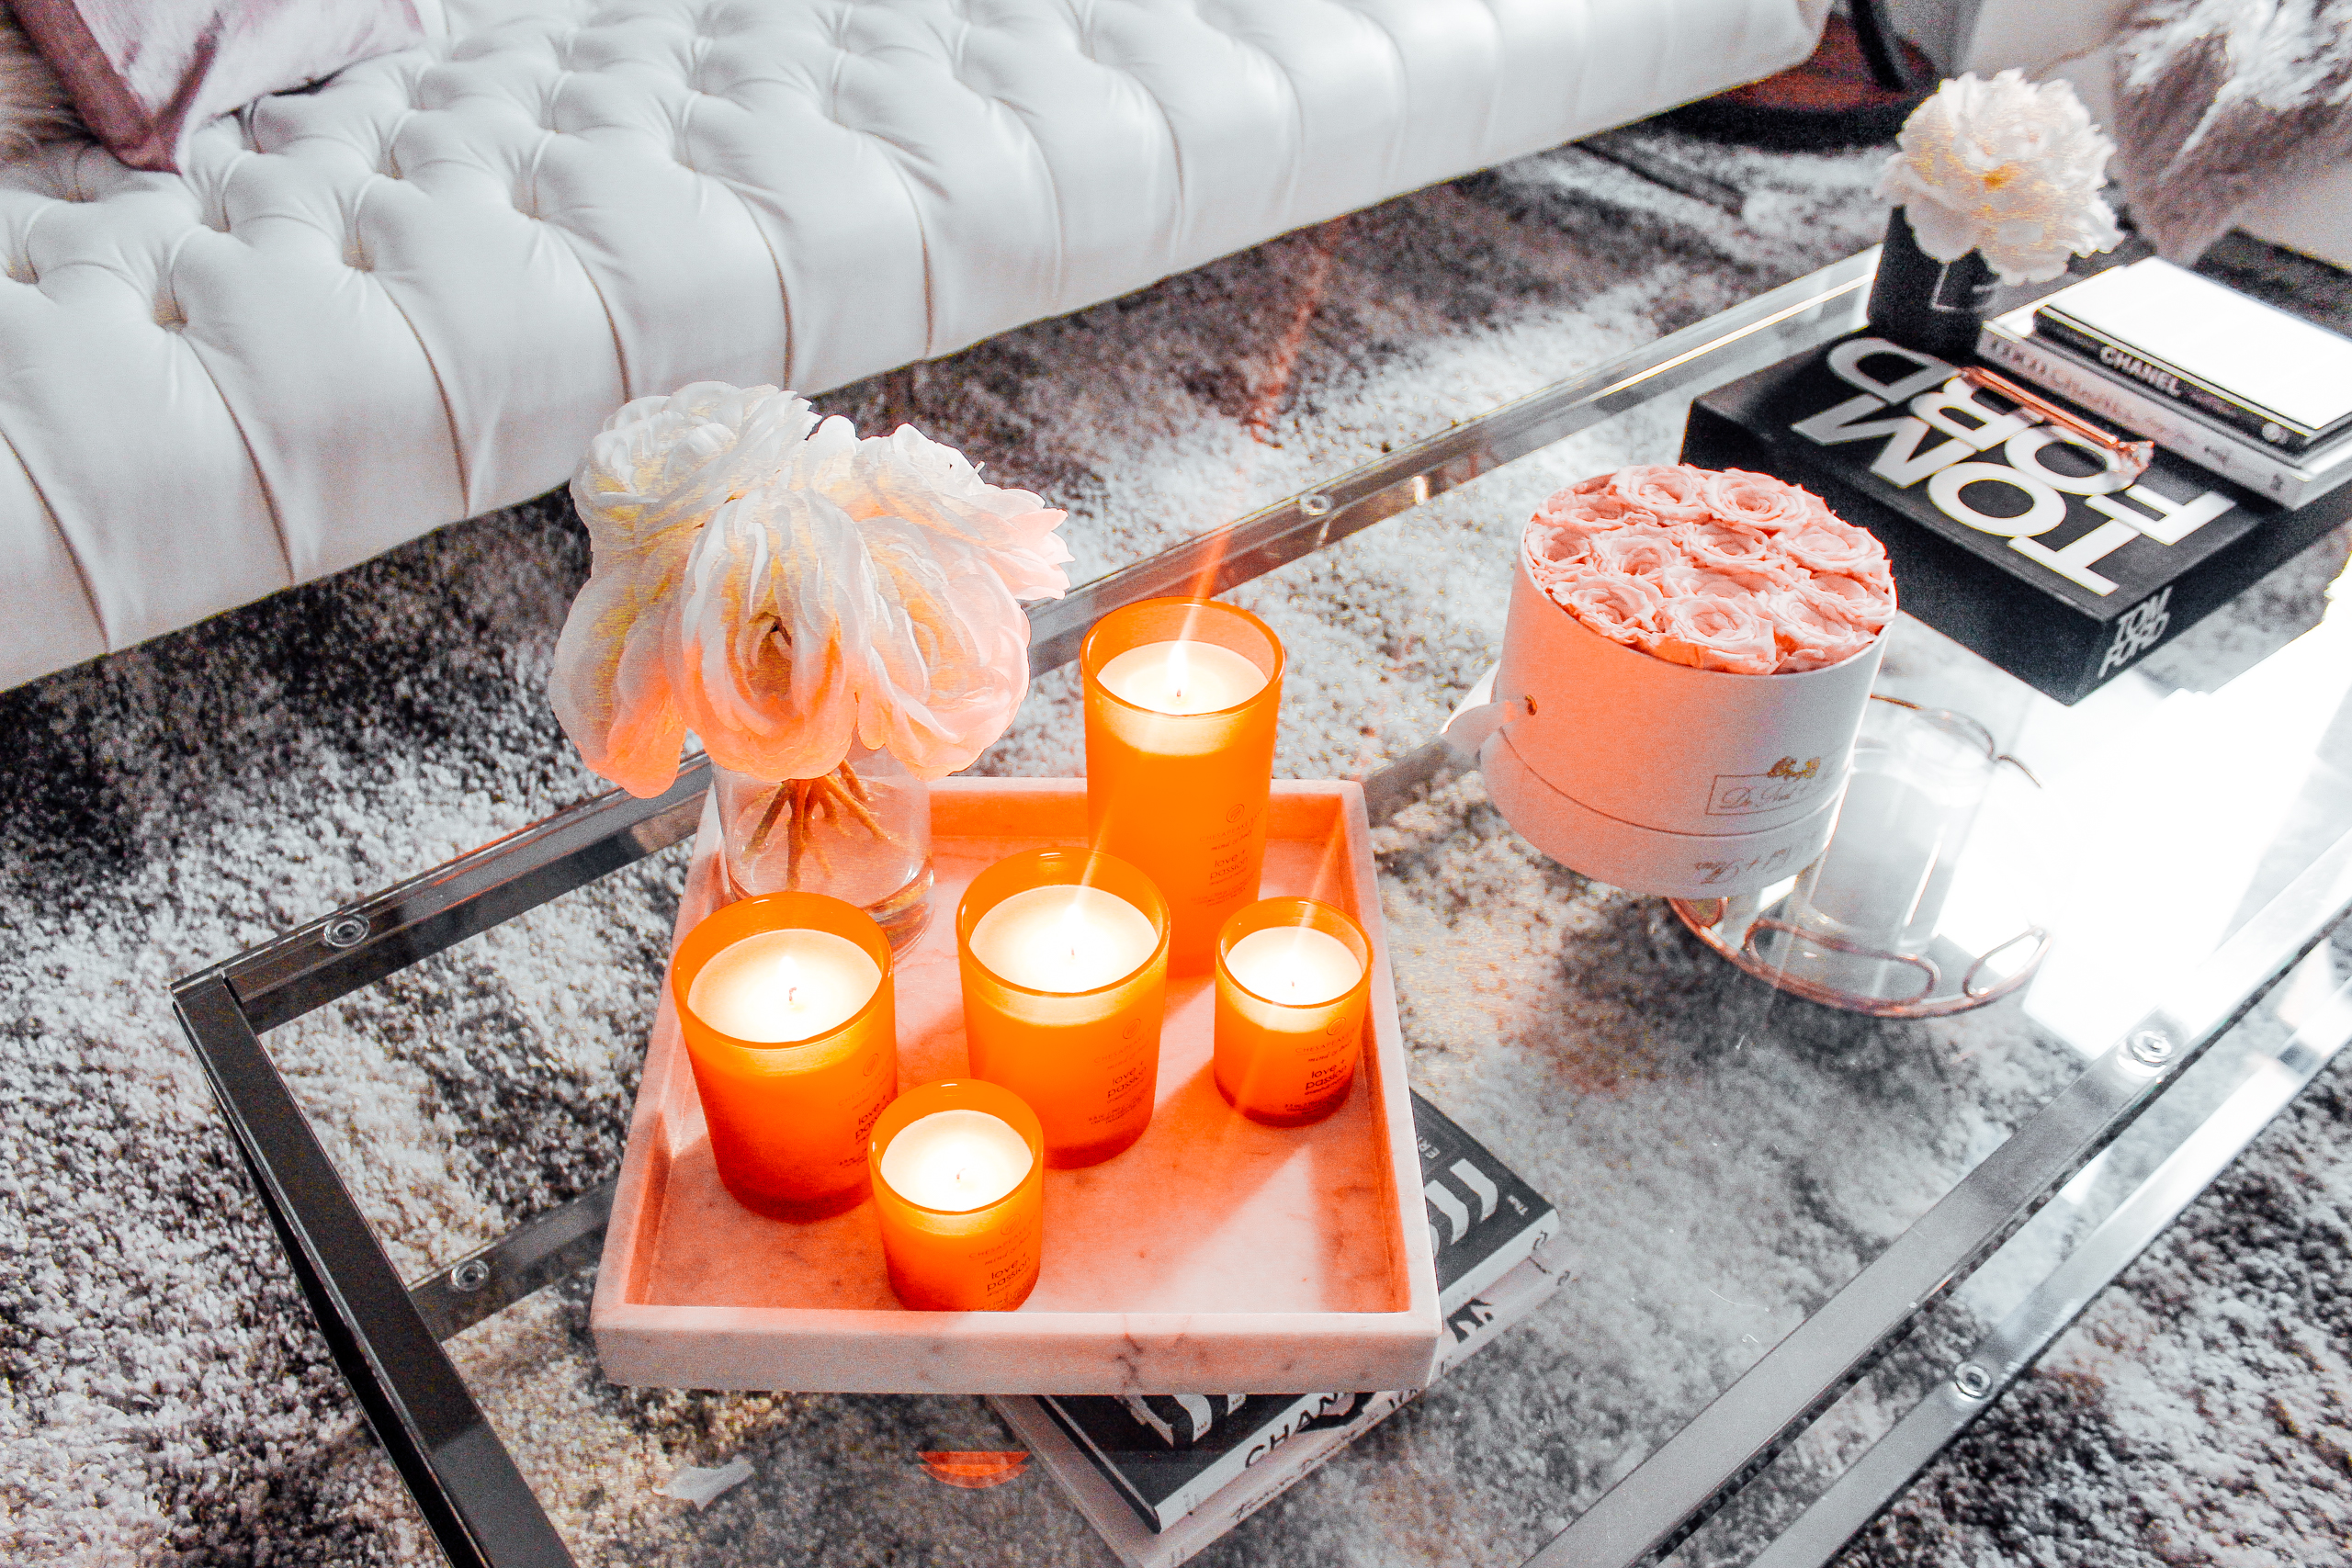 Valentine's Day Vibes w/ Chesapeake Bay Candles | Blondie in the City by Hayley Larue | Home Decor | Apartment Living room decor